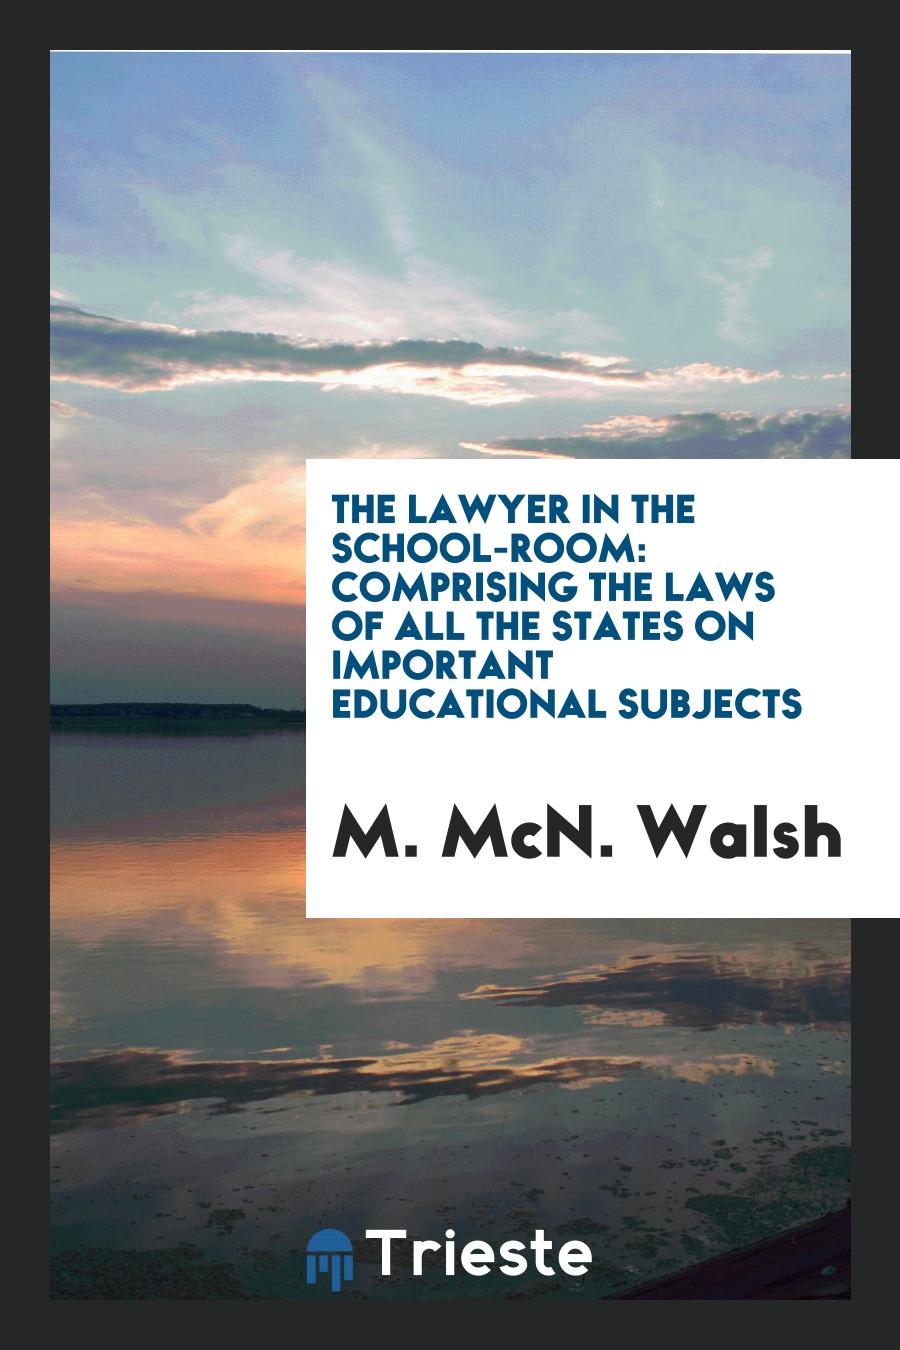 The Lawyer in the School-Room: Comprising the Laws of All the States on Important Educational Subjects